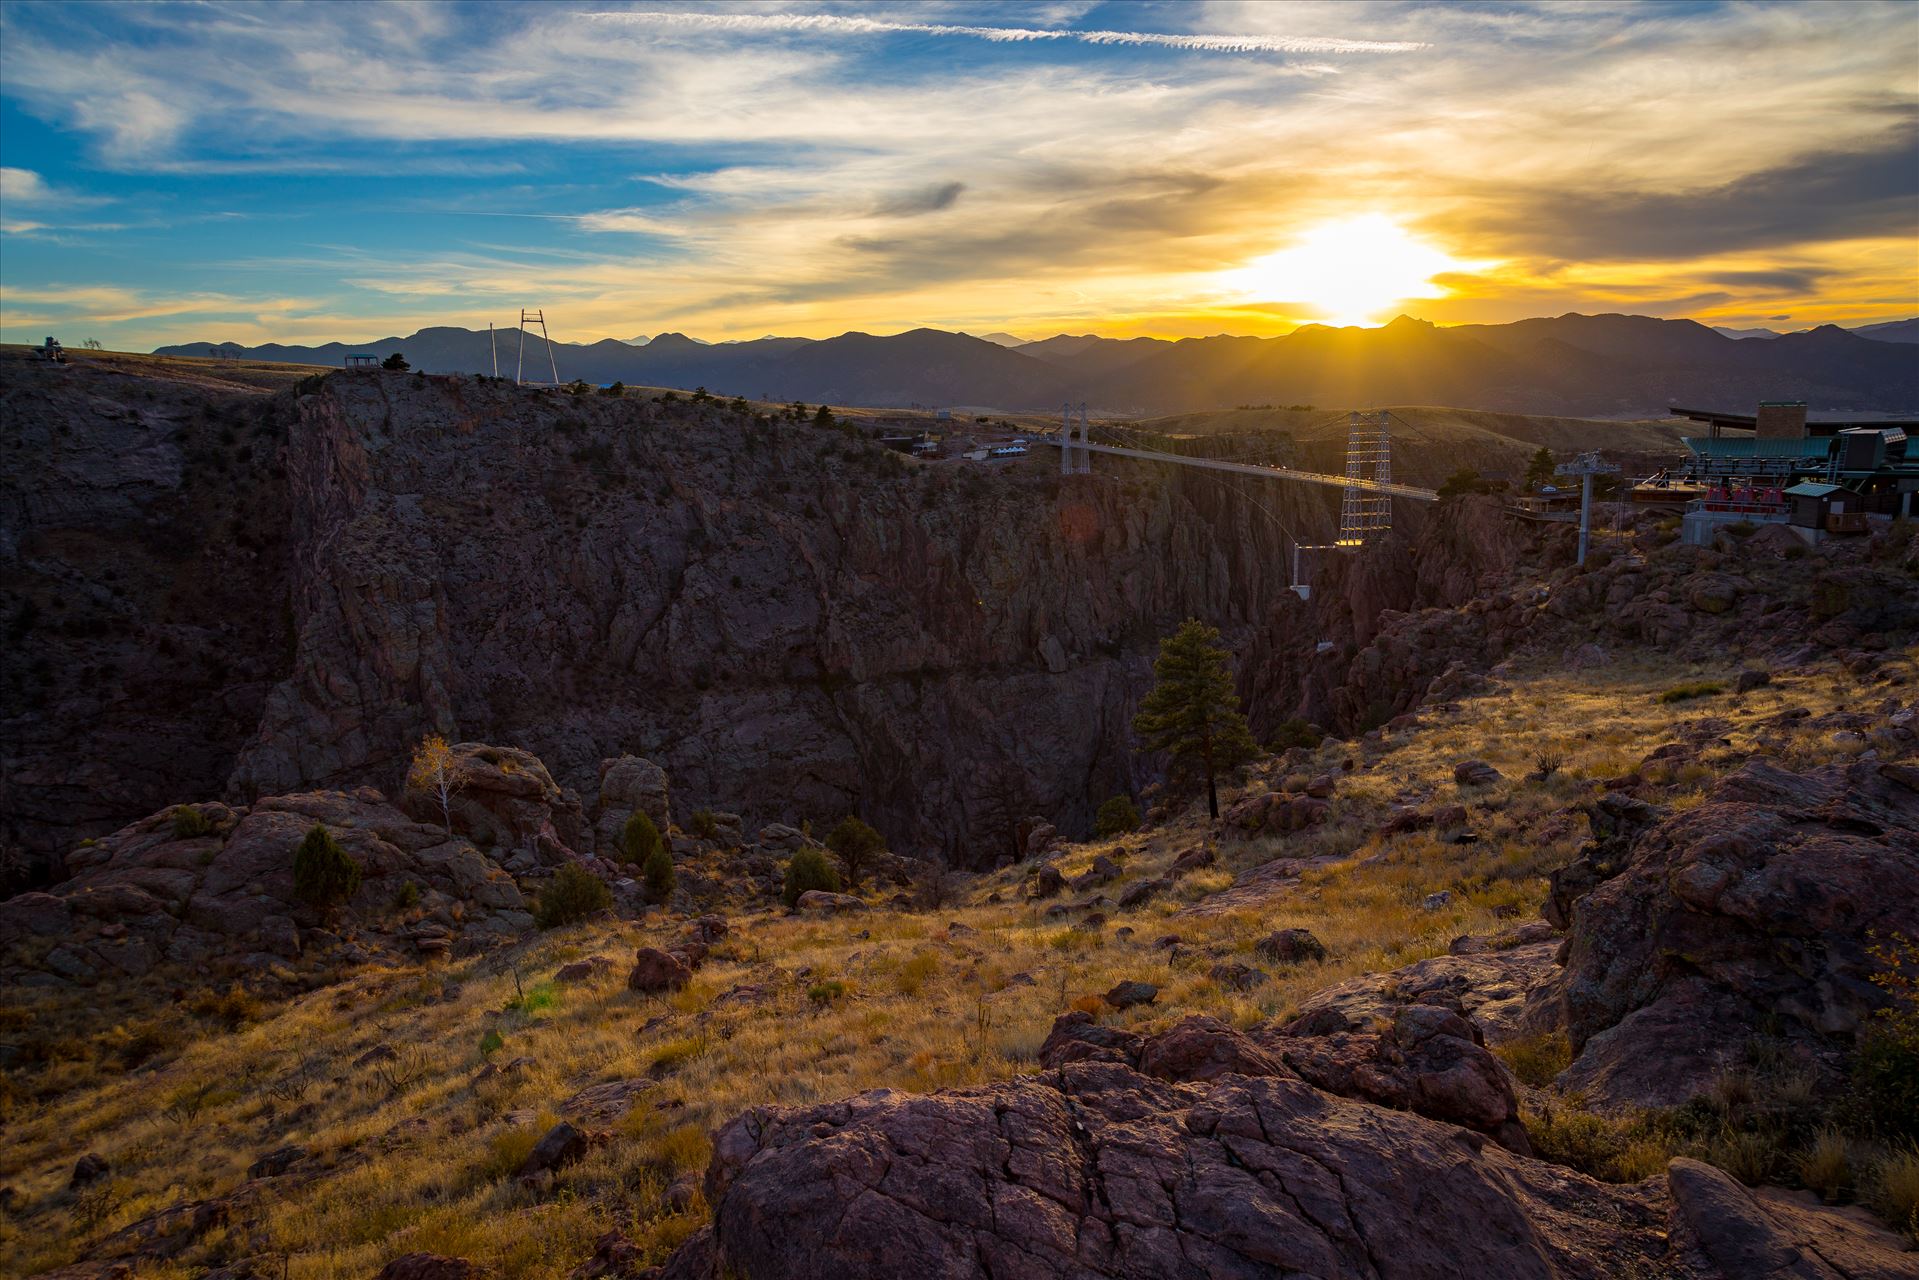 Royal Gorge No 3 - The sun sets over the bridge at the Royal Gorge, near Canon City, Colorado. The bridge is the highest bridge in North America, at almost 1,000 feet over the Arkansas River. by Scott Smith Photos